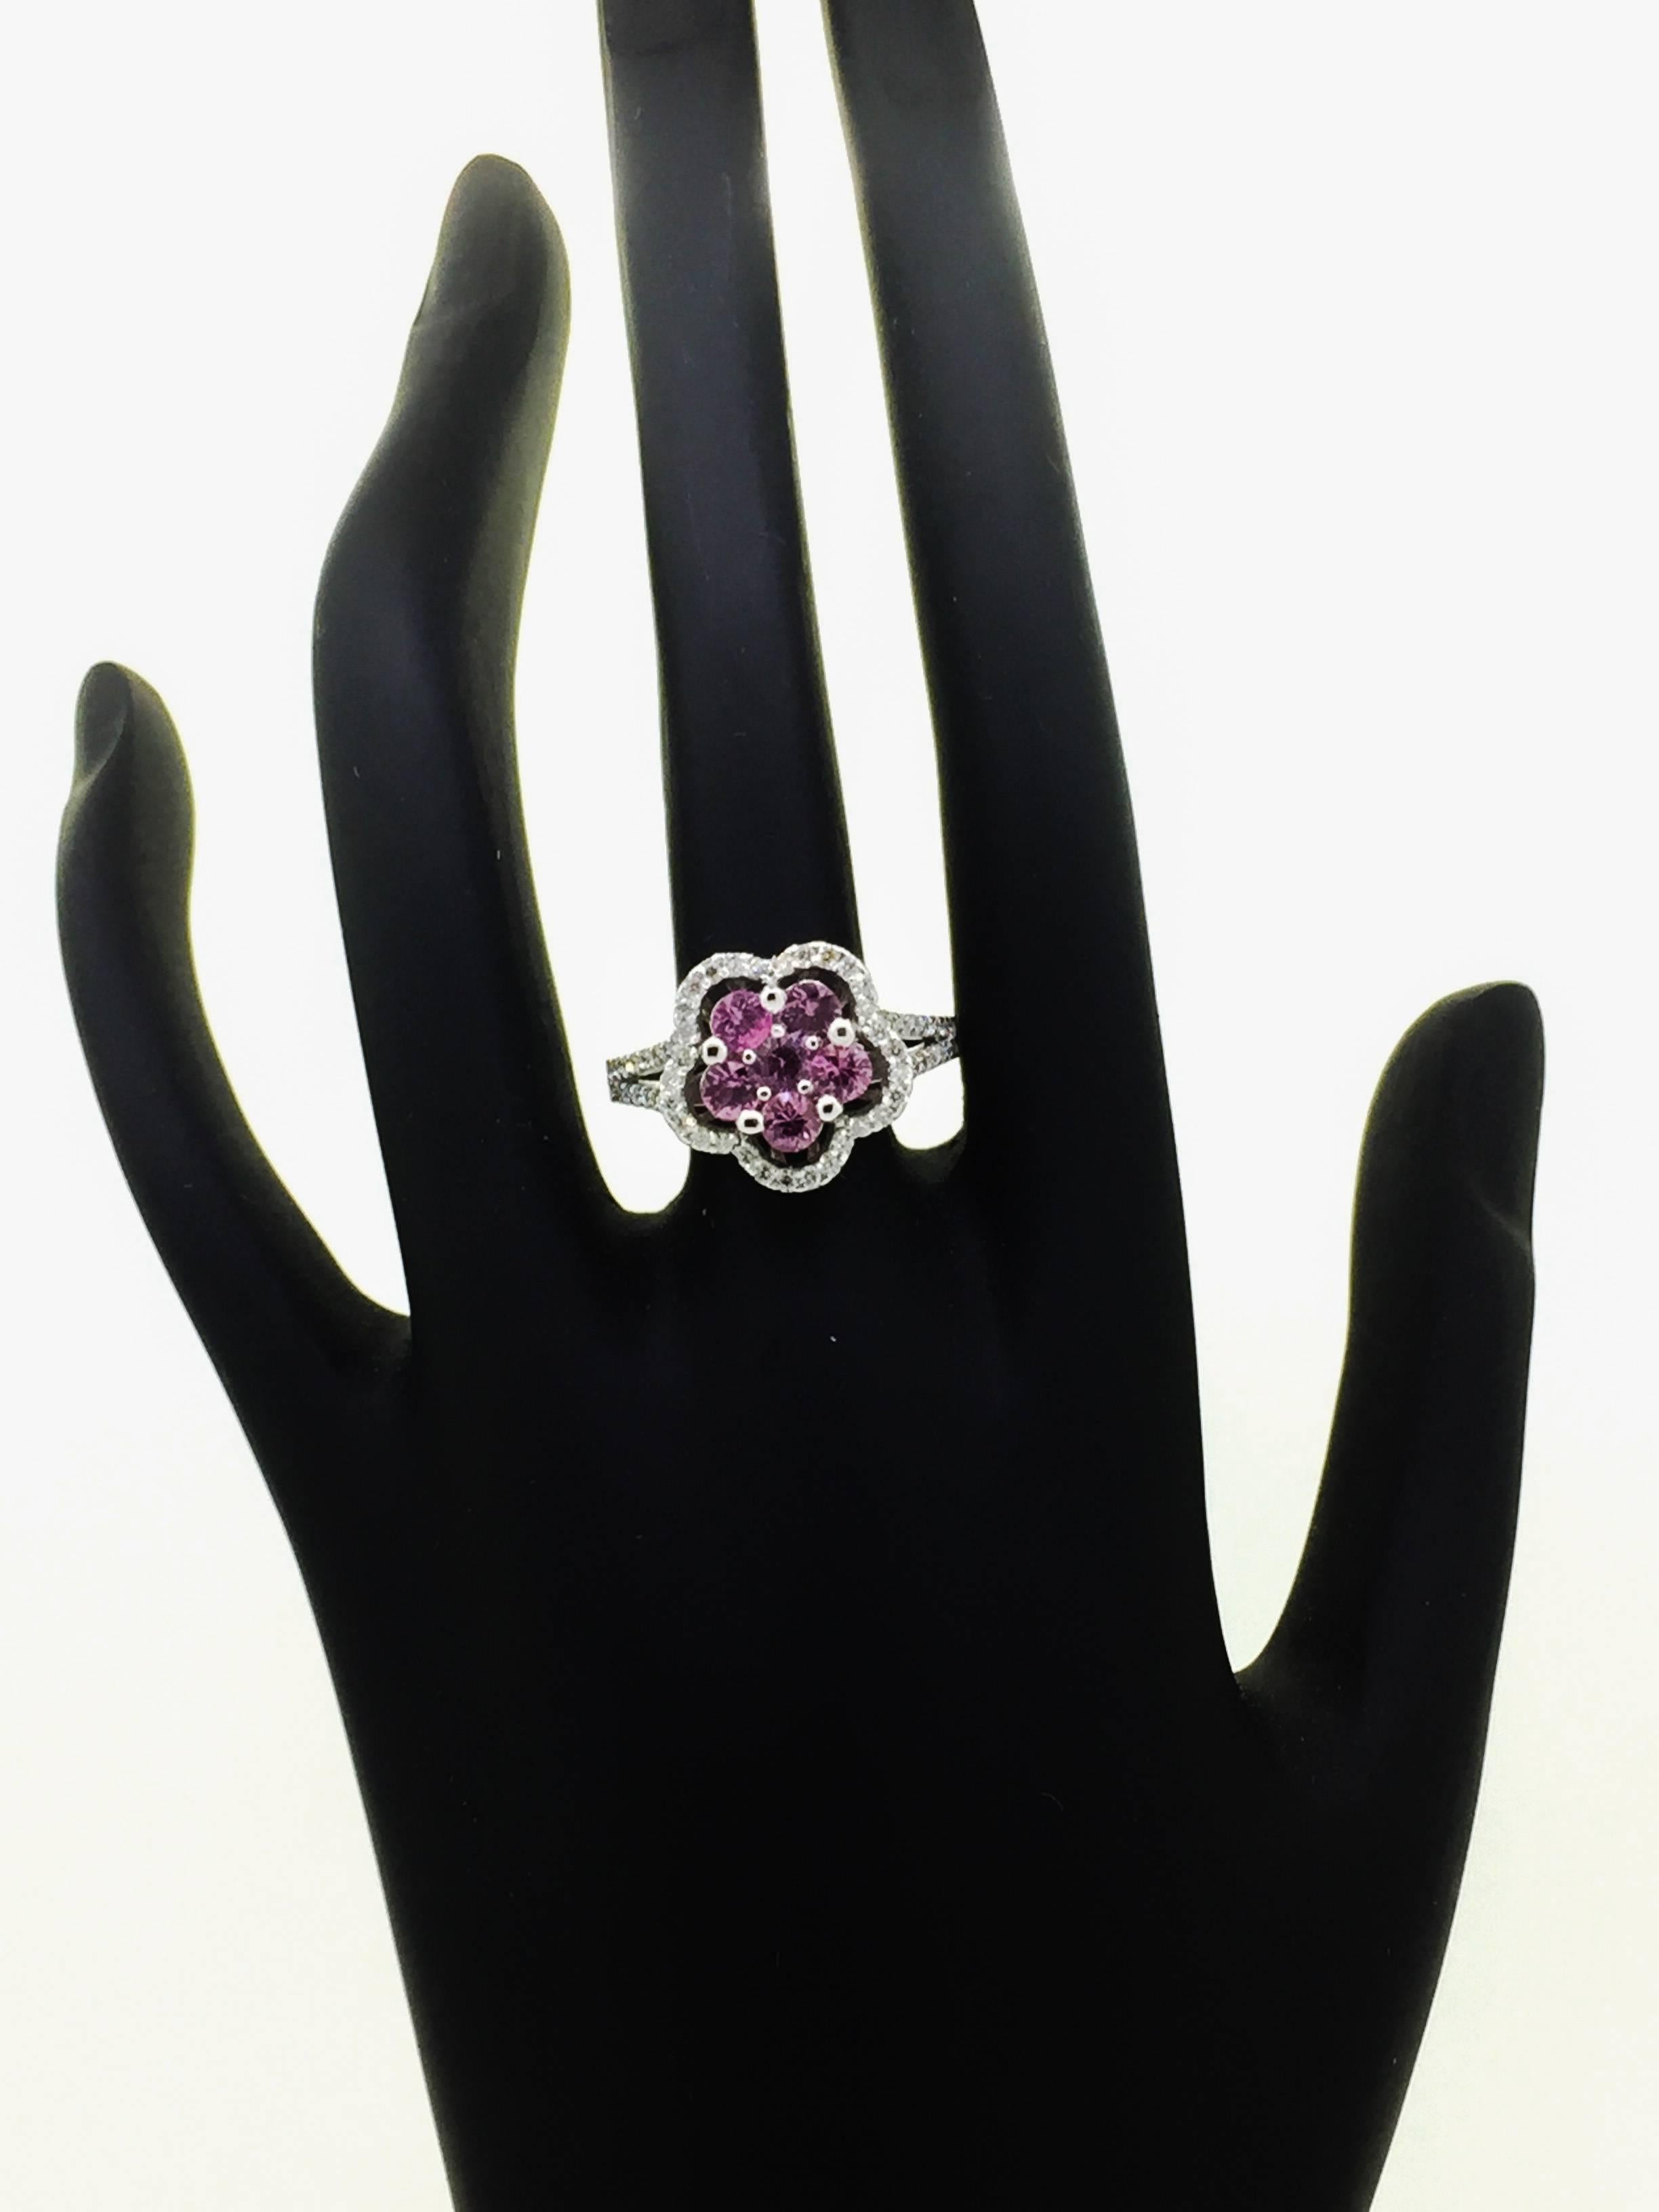 1.51 Carat Pink Sapphire Diamond 14 Karat White Gold Ring In New Condition For Sale In Los Angeles, CA